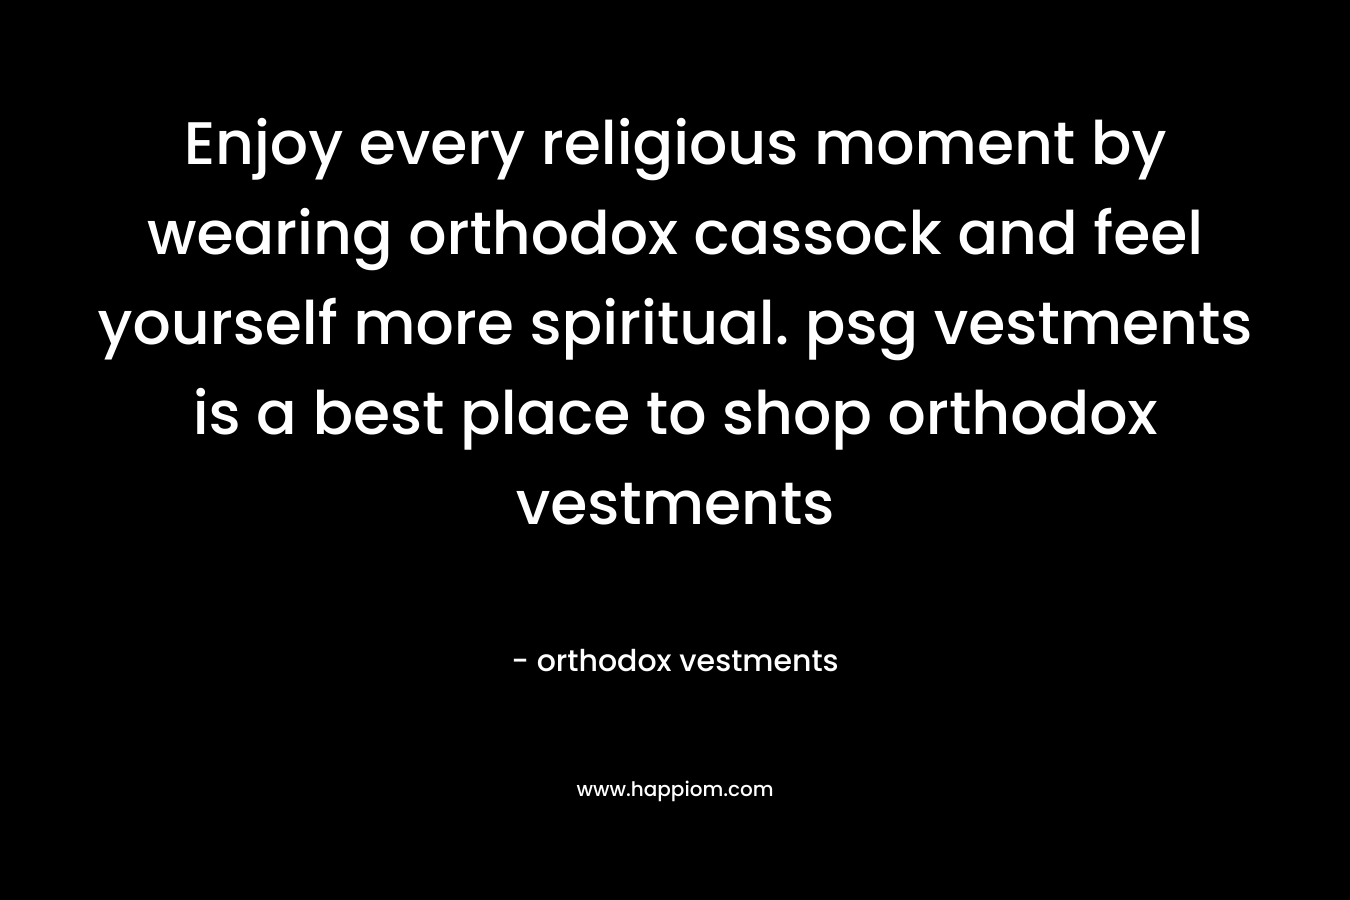 Enjoy every religious moment by wearing orthodox cassock and feel yourself more spiritual. psg vestments is a best place to shop orthodox vestments – orthodox vestments